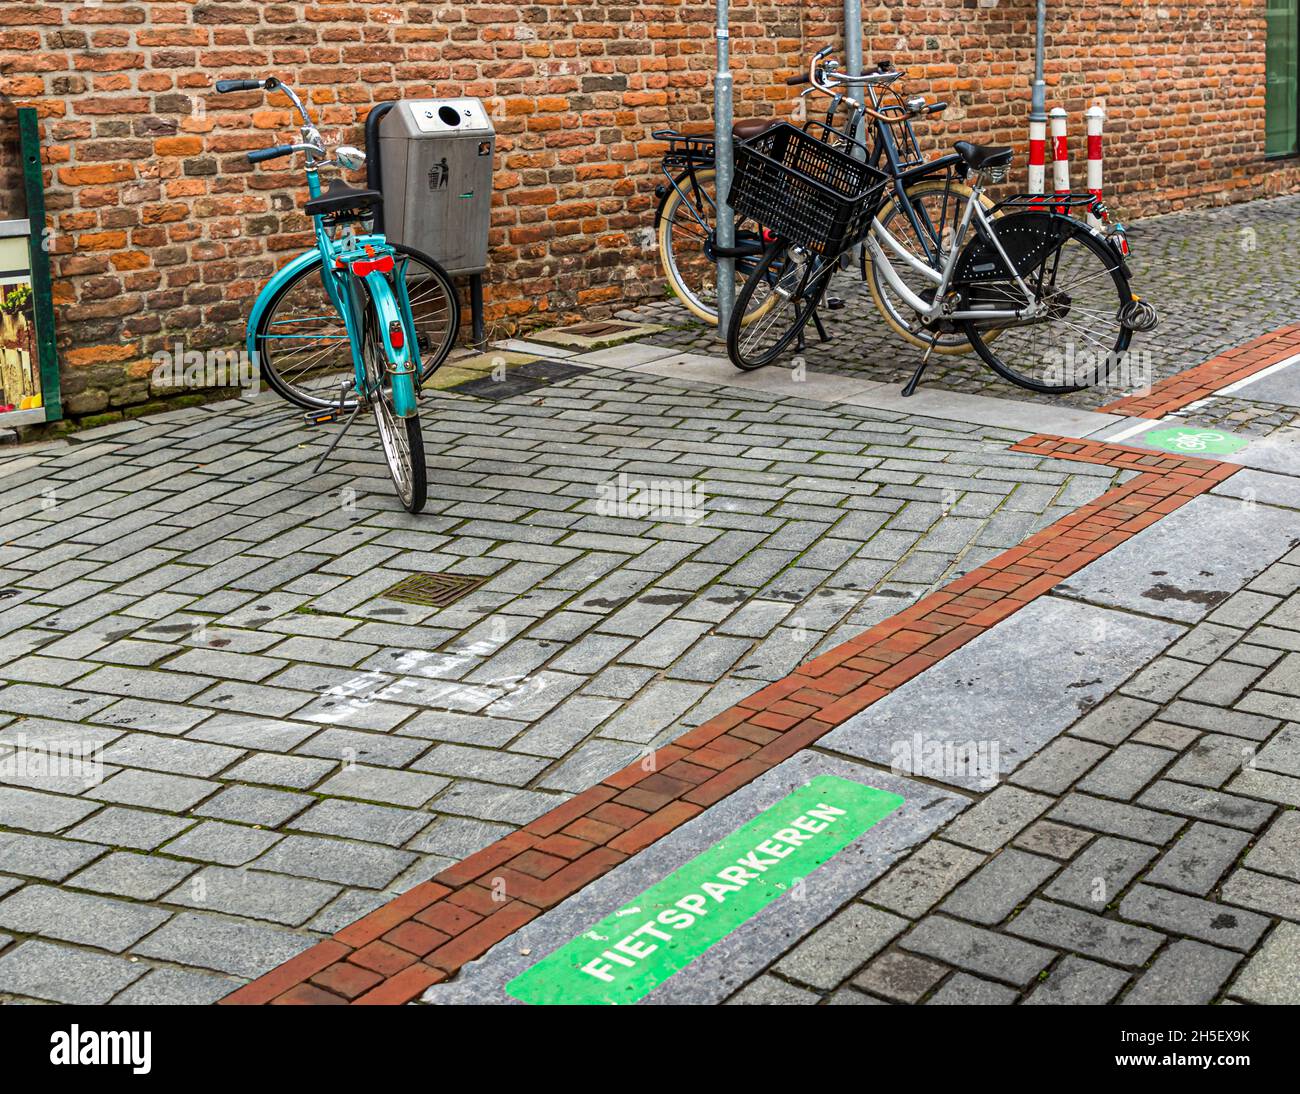 Bicycle parking in Zutphen, Netherlands Stock Photo